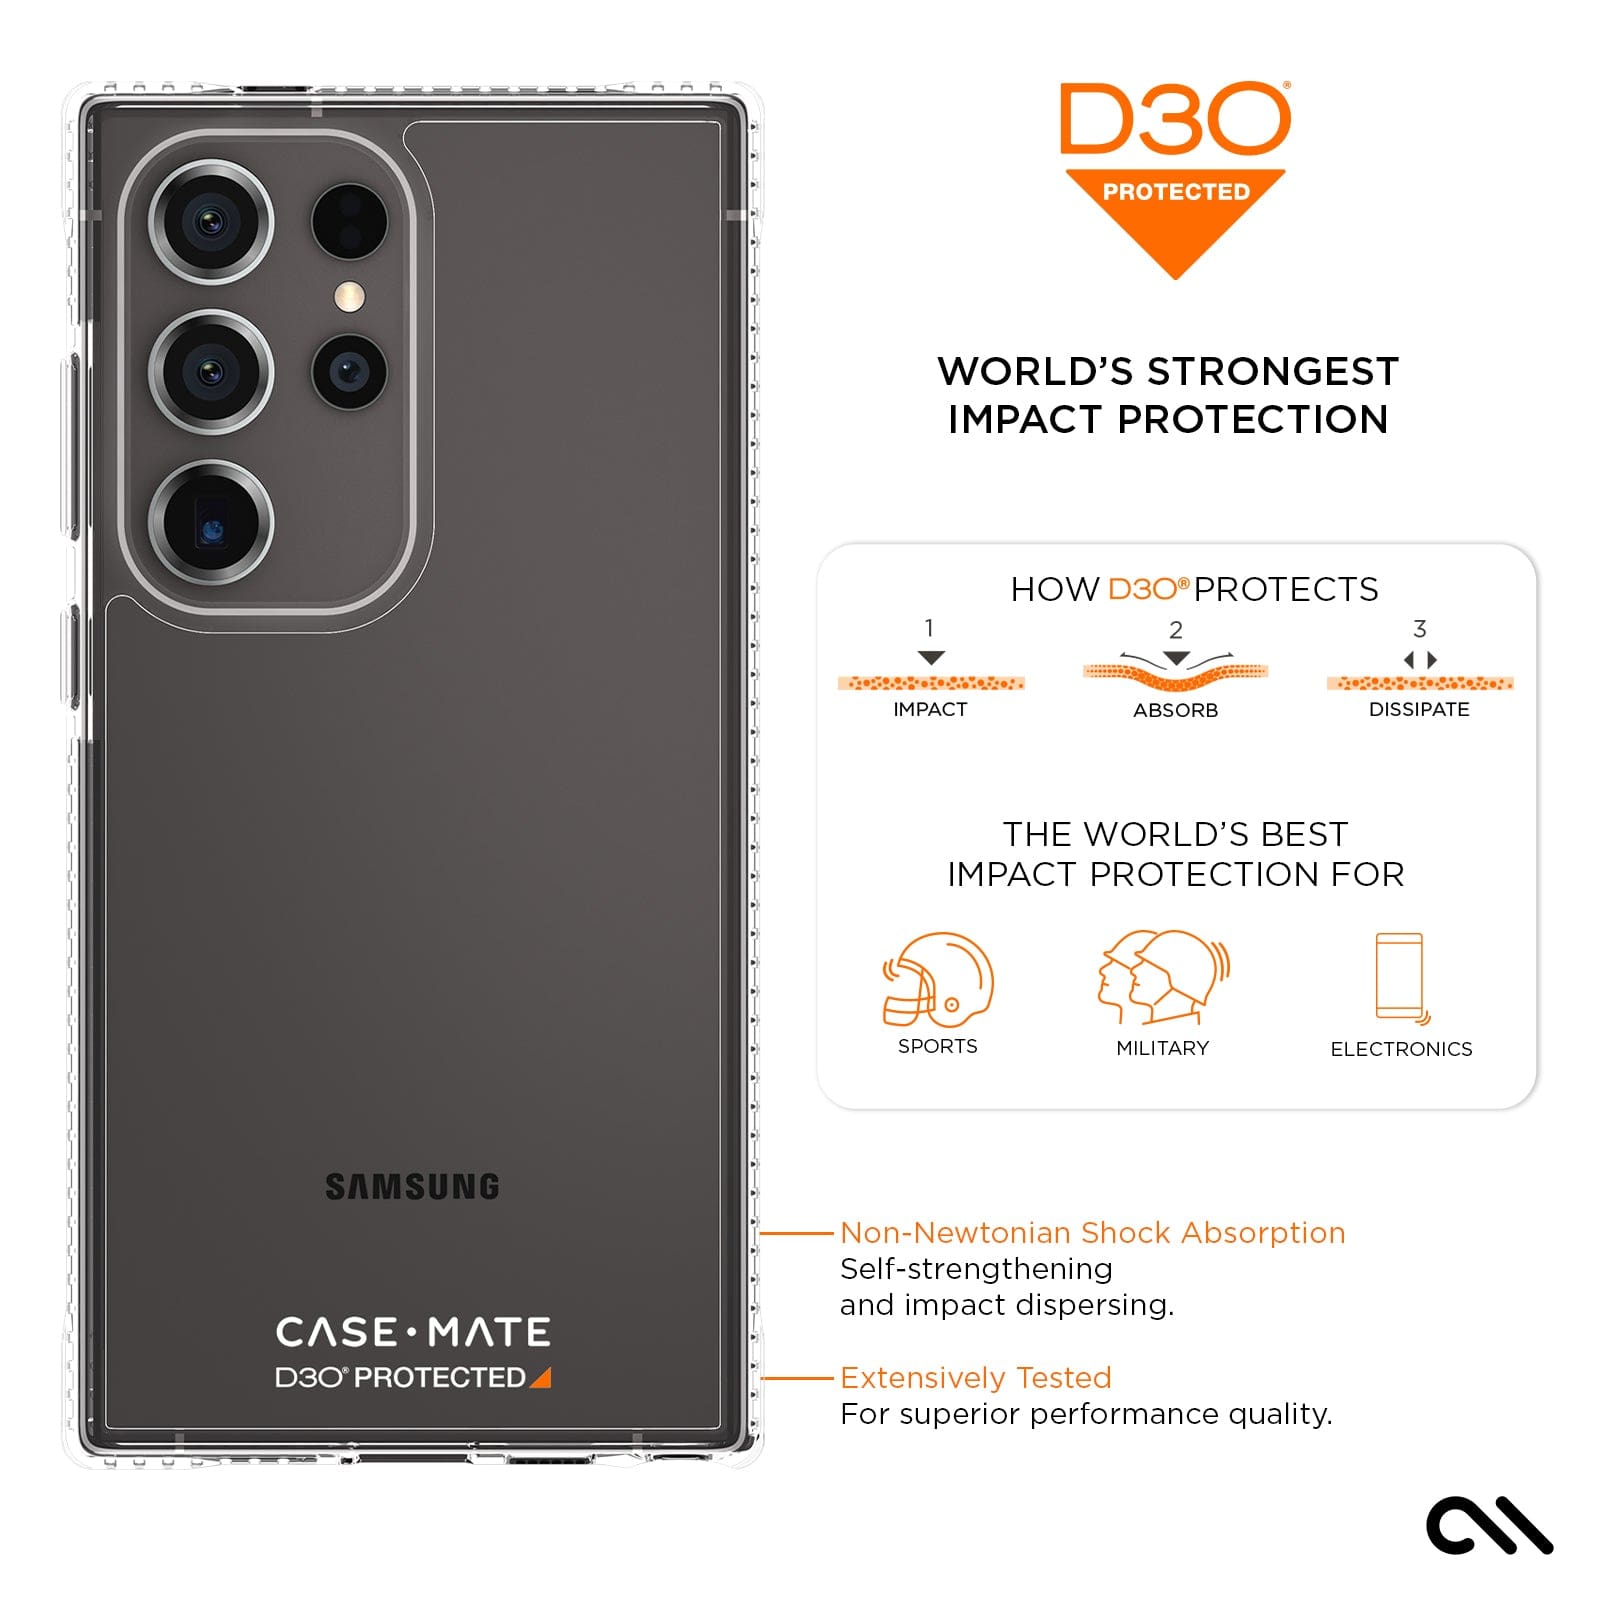 D3O PROTECTED. WORLD'S STRONGEST IMPACT PROTECTION